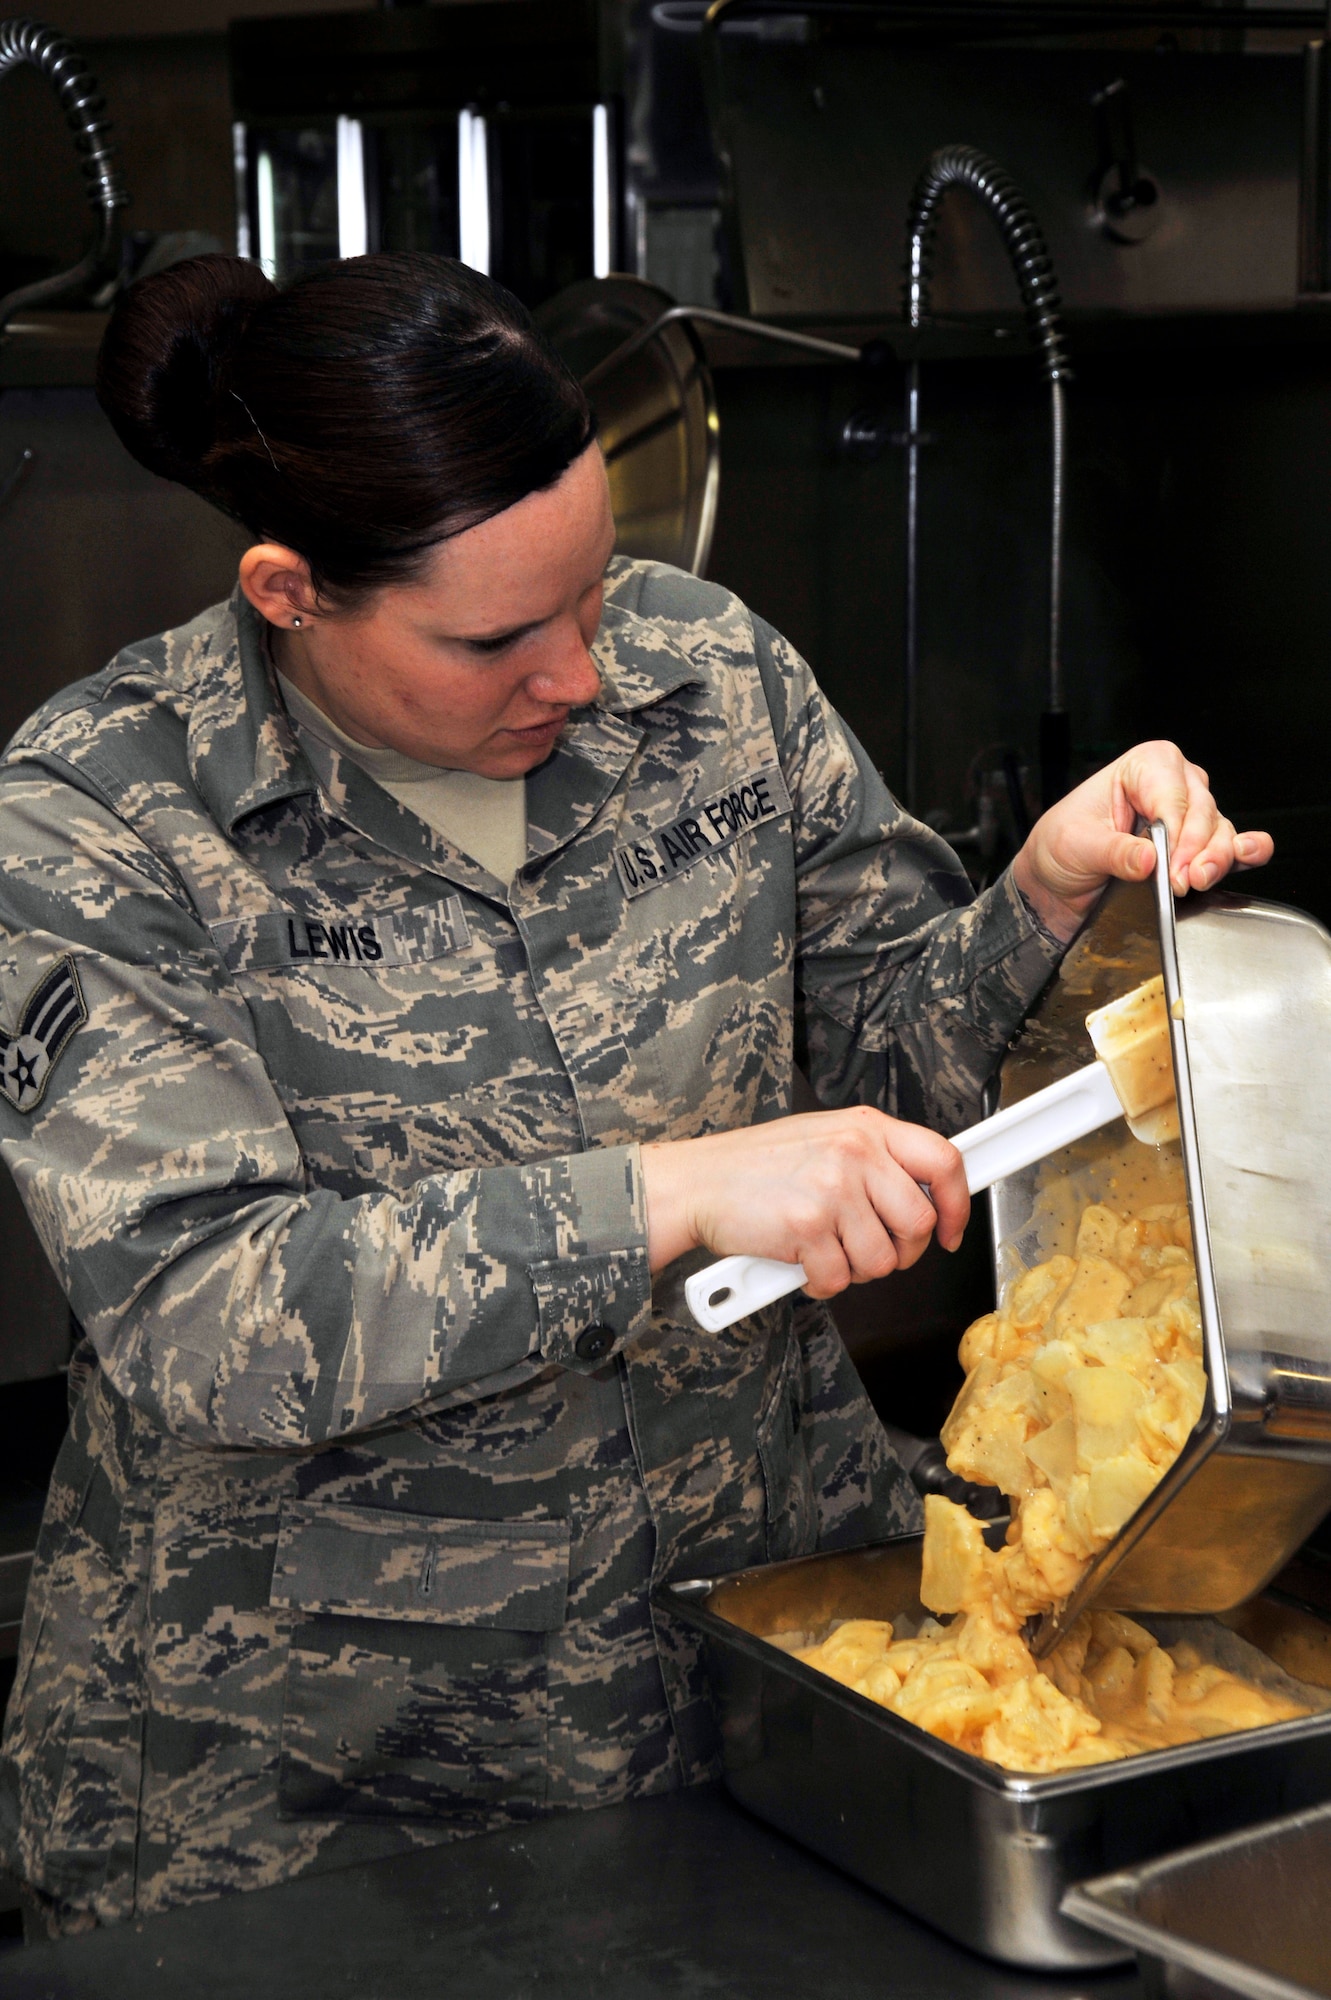 U.S. Air Force Senior Airman Catherine Lewis, 35th Force Support Squadron food services shift leader, combines two pans of potatoes au gratin at Misawa Air Base, Japan, April 18, 2013. The Grissom Dining Facility here can serve more than 600 people daily over four different meals. (U.S. Air Force photo by Airman 1st Class Zachary Kee)